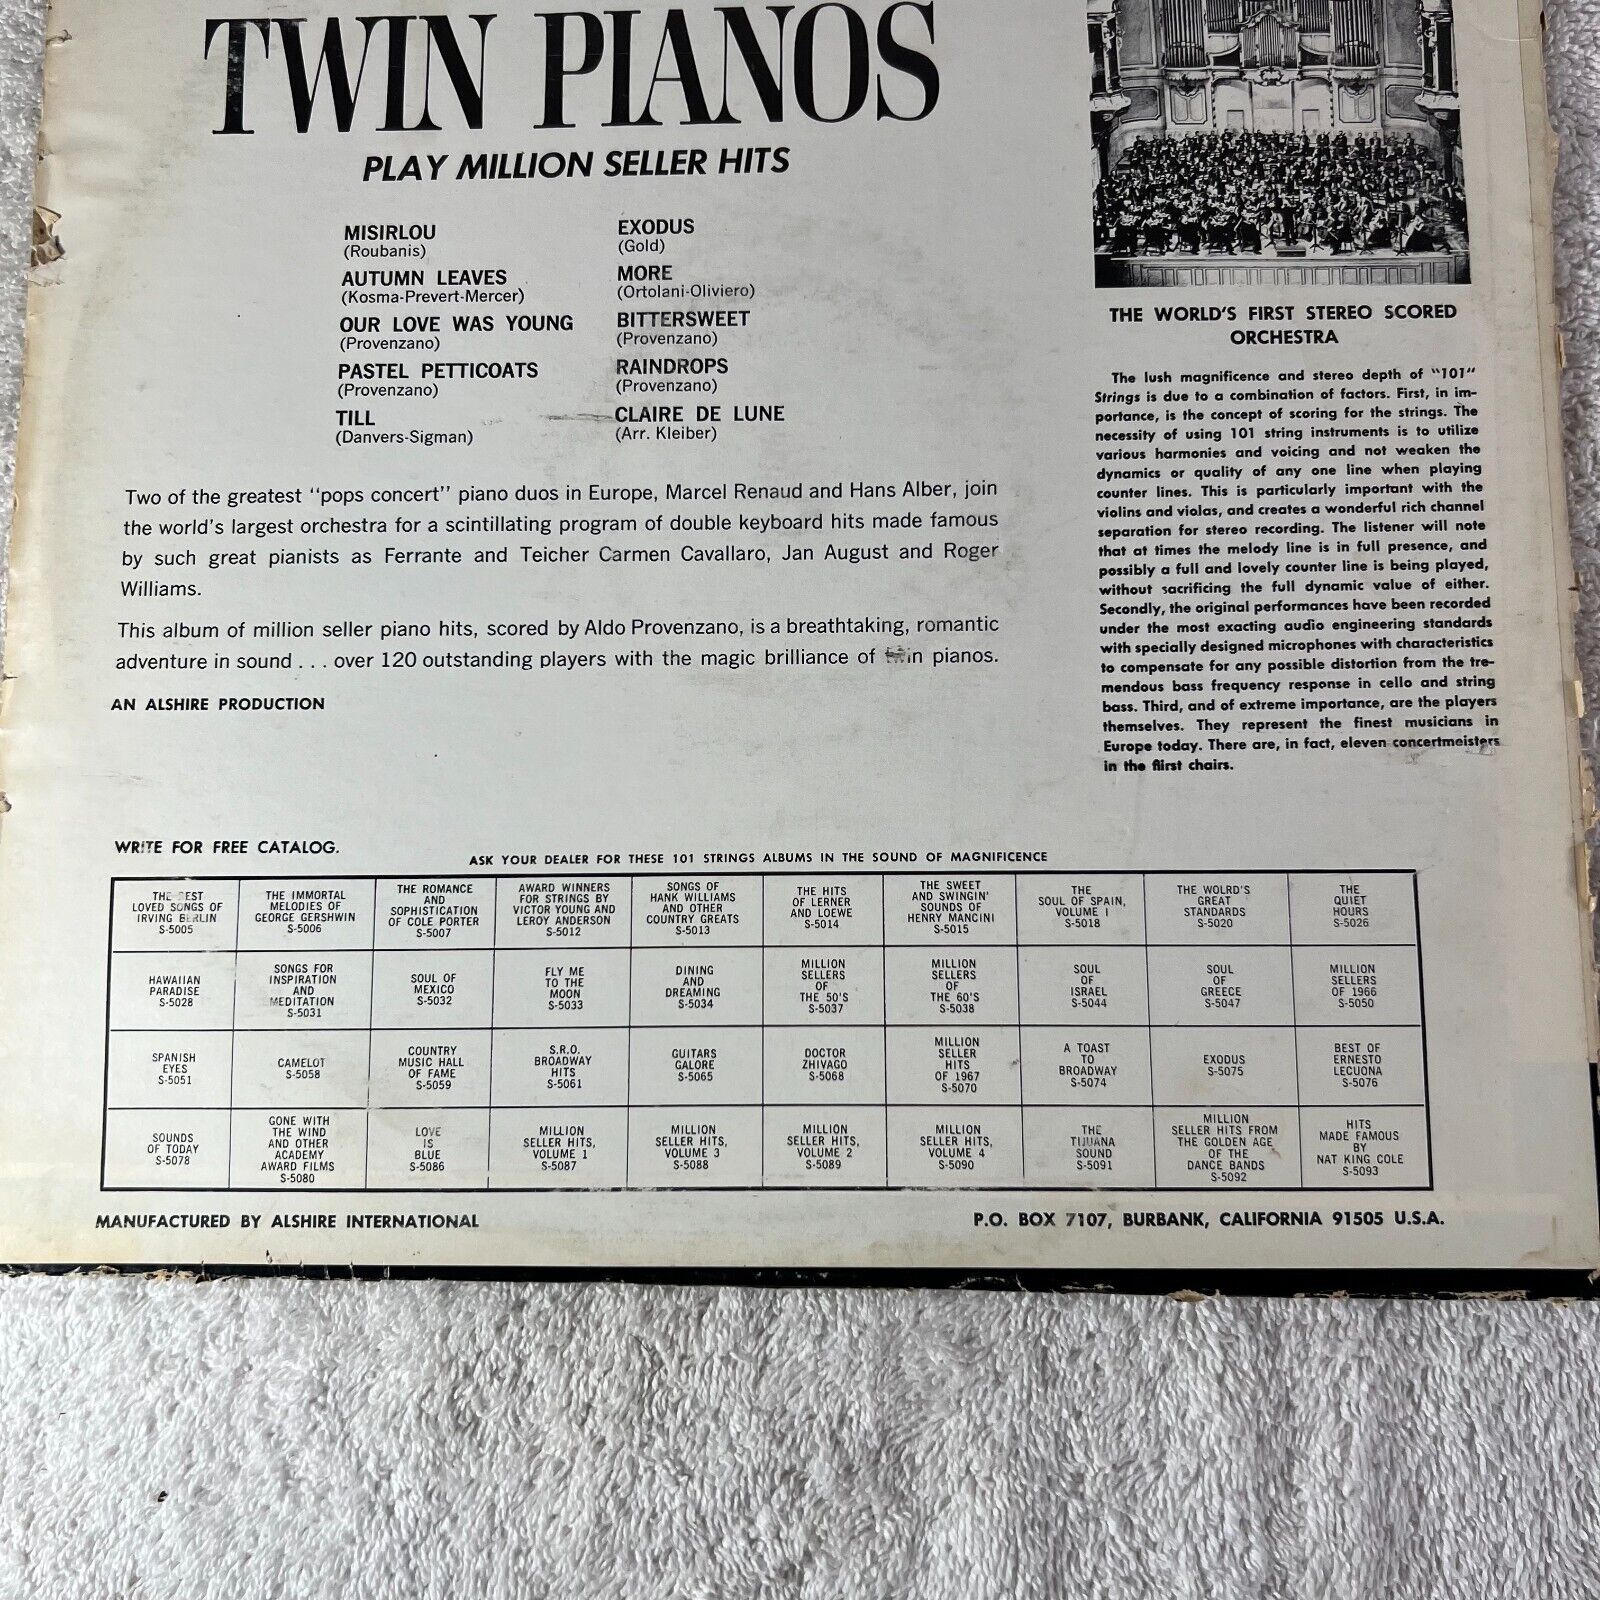 101 STRINGS WITH TWIN PIANOS MILLION SELLER HITS Alshire ST-5102 1967 VINYL LP